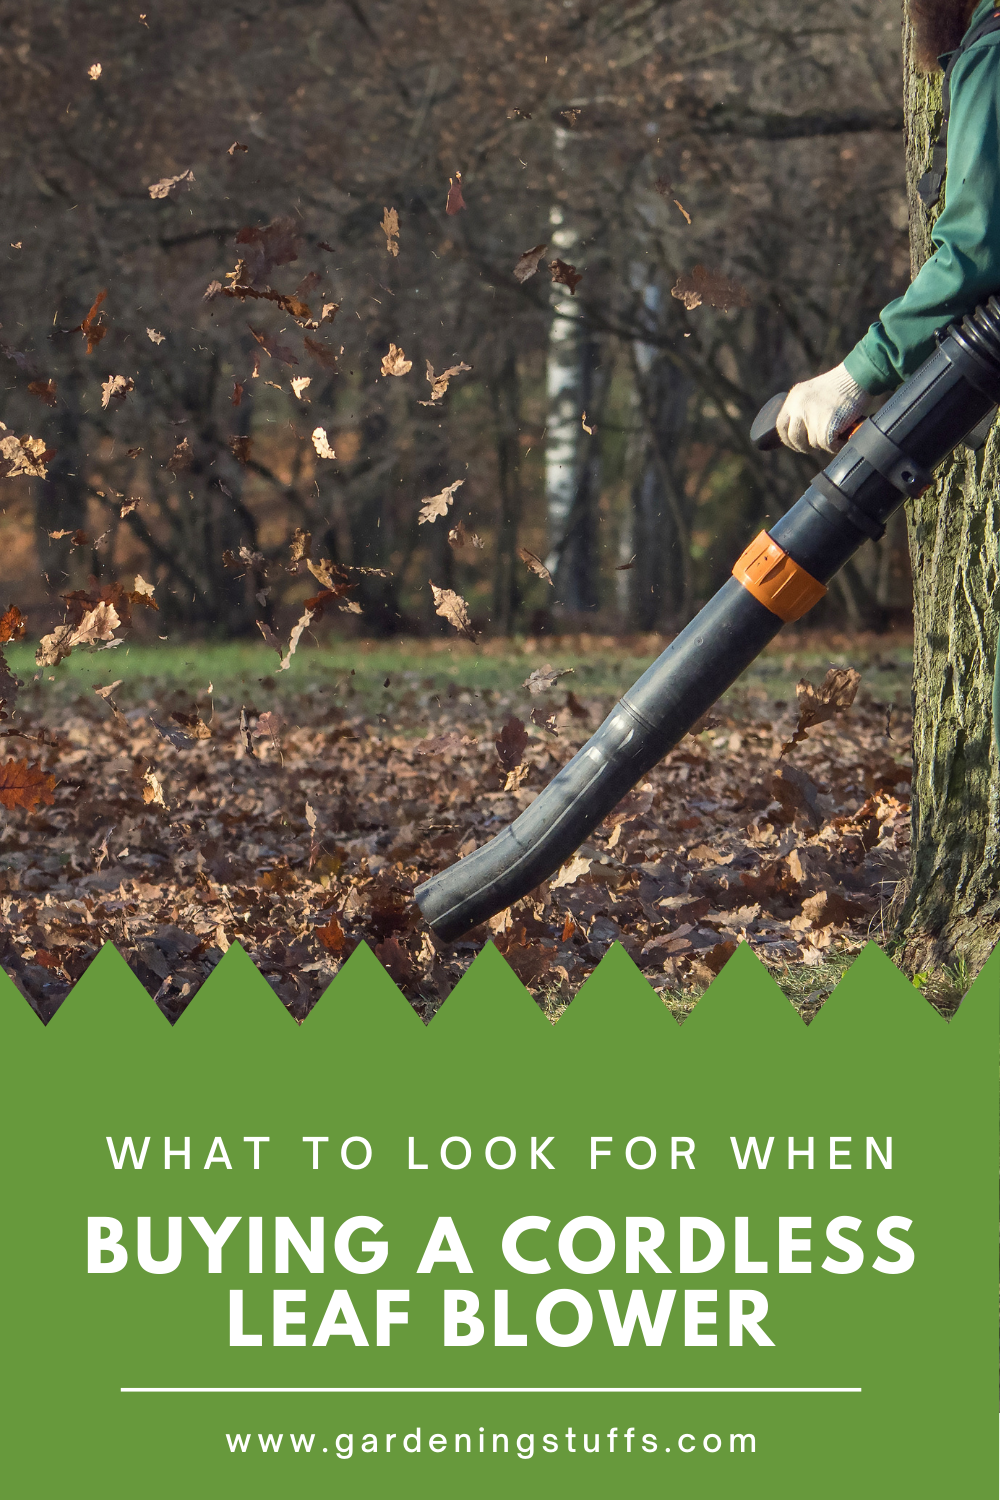 How do you know which leaf blower is the best for you when every device looks excellent? Read our buying guide to find a suitable device for you.